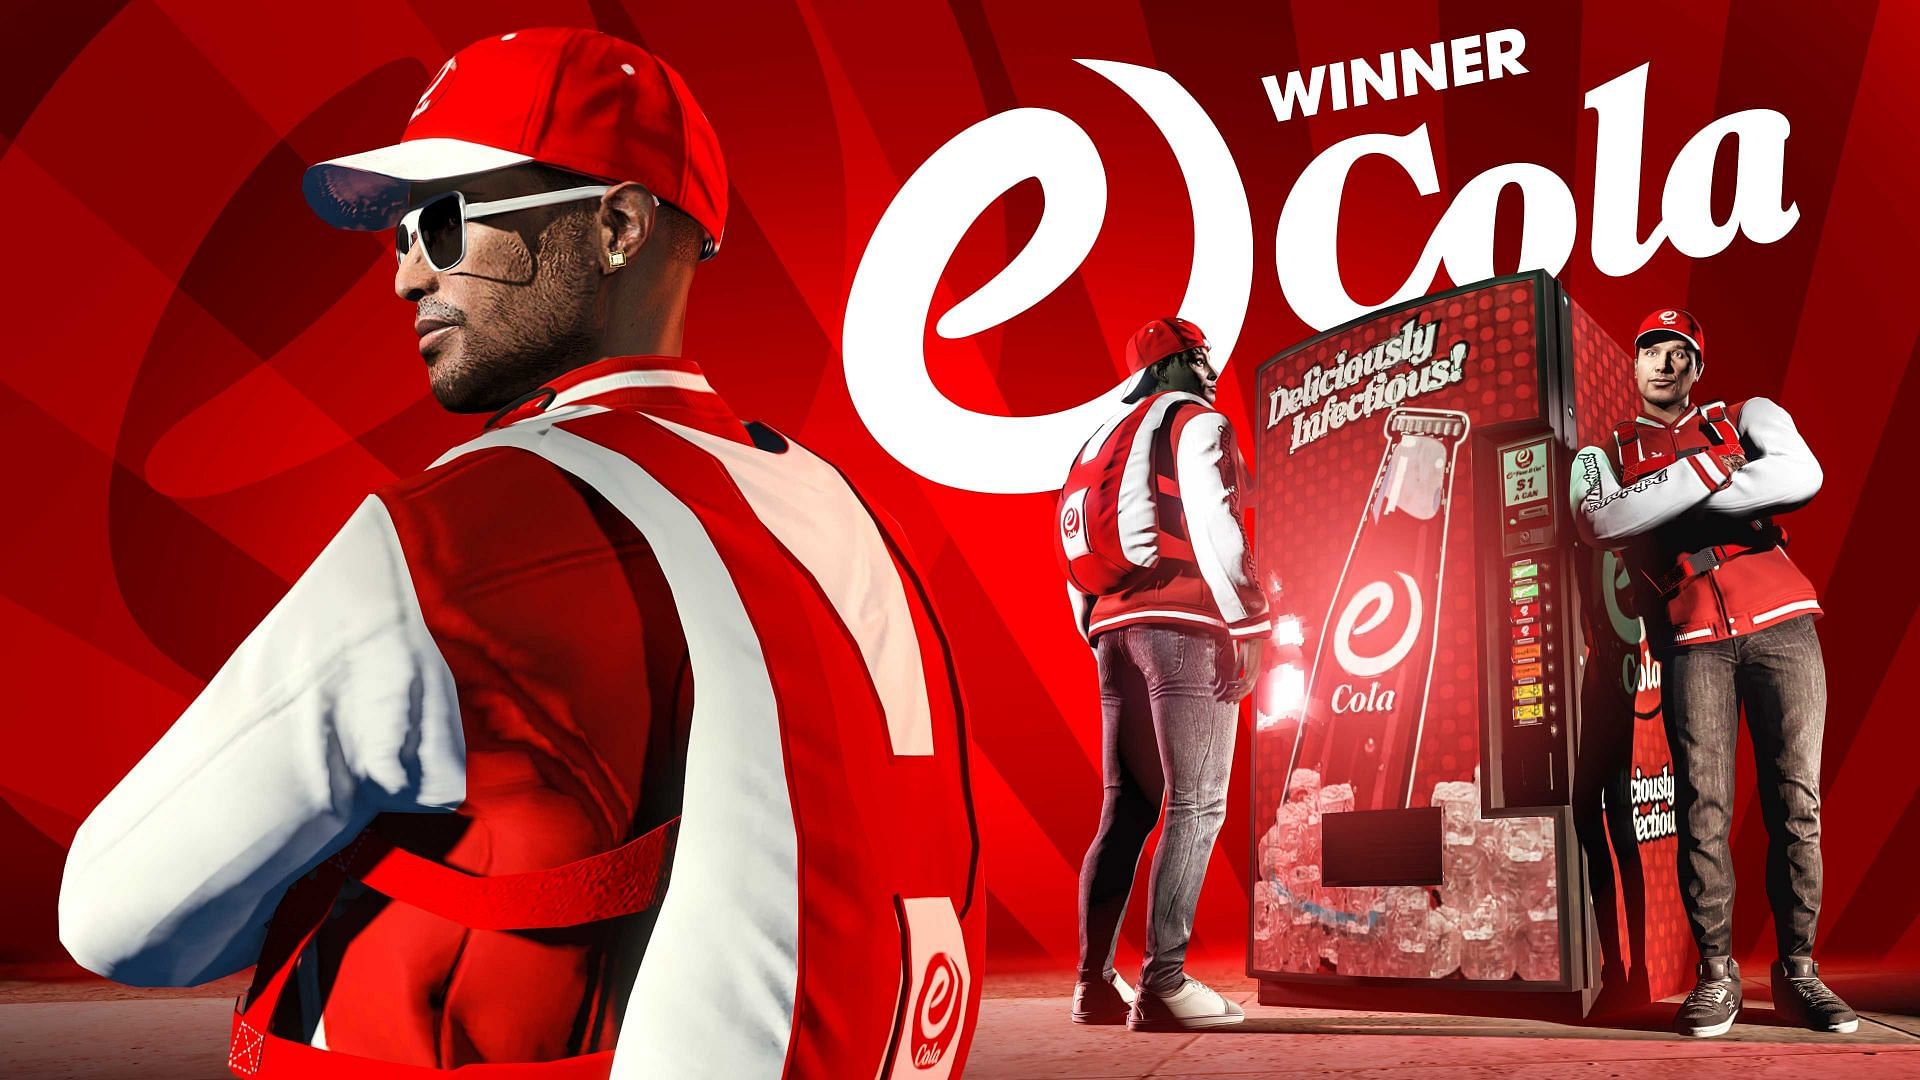 eCola have been declared winners in the recently concluded Soda Wars. (Image via Rockstar Games)